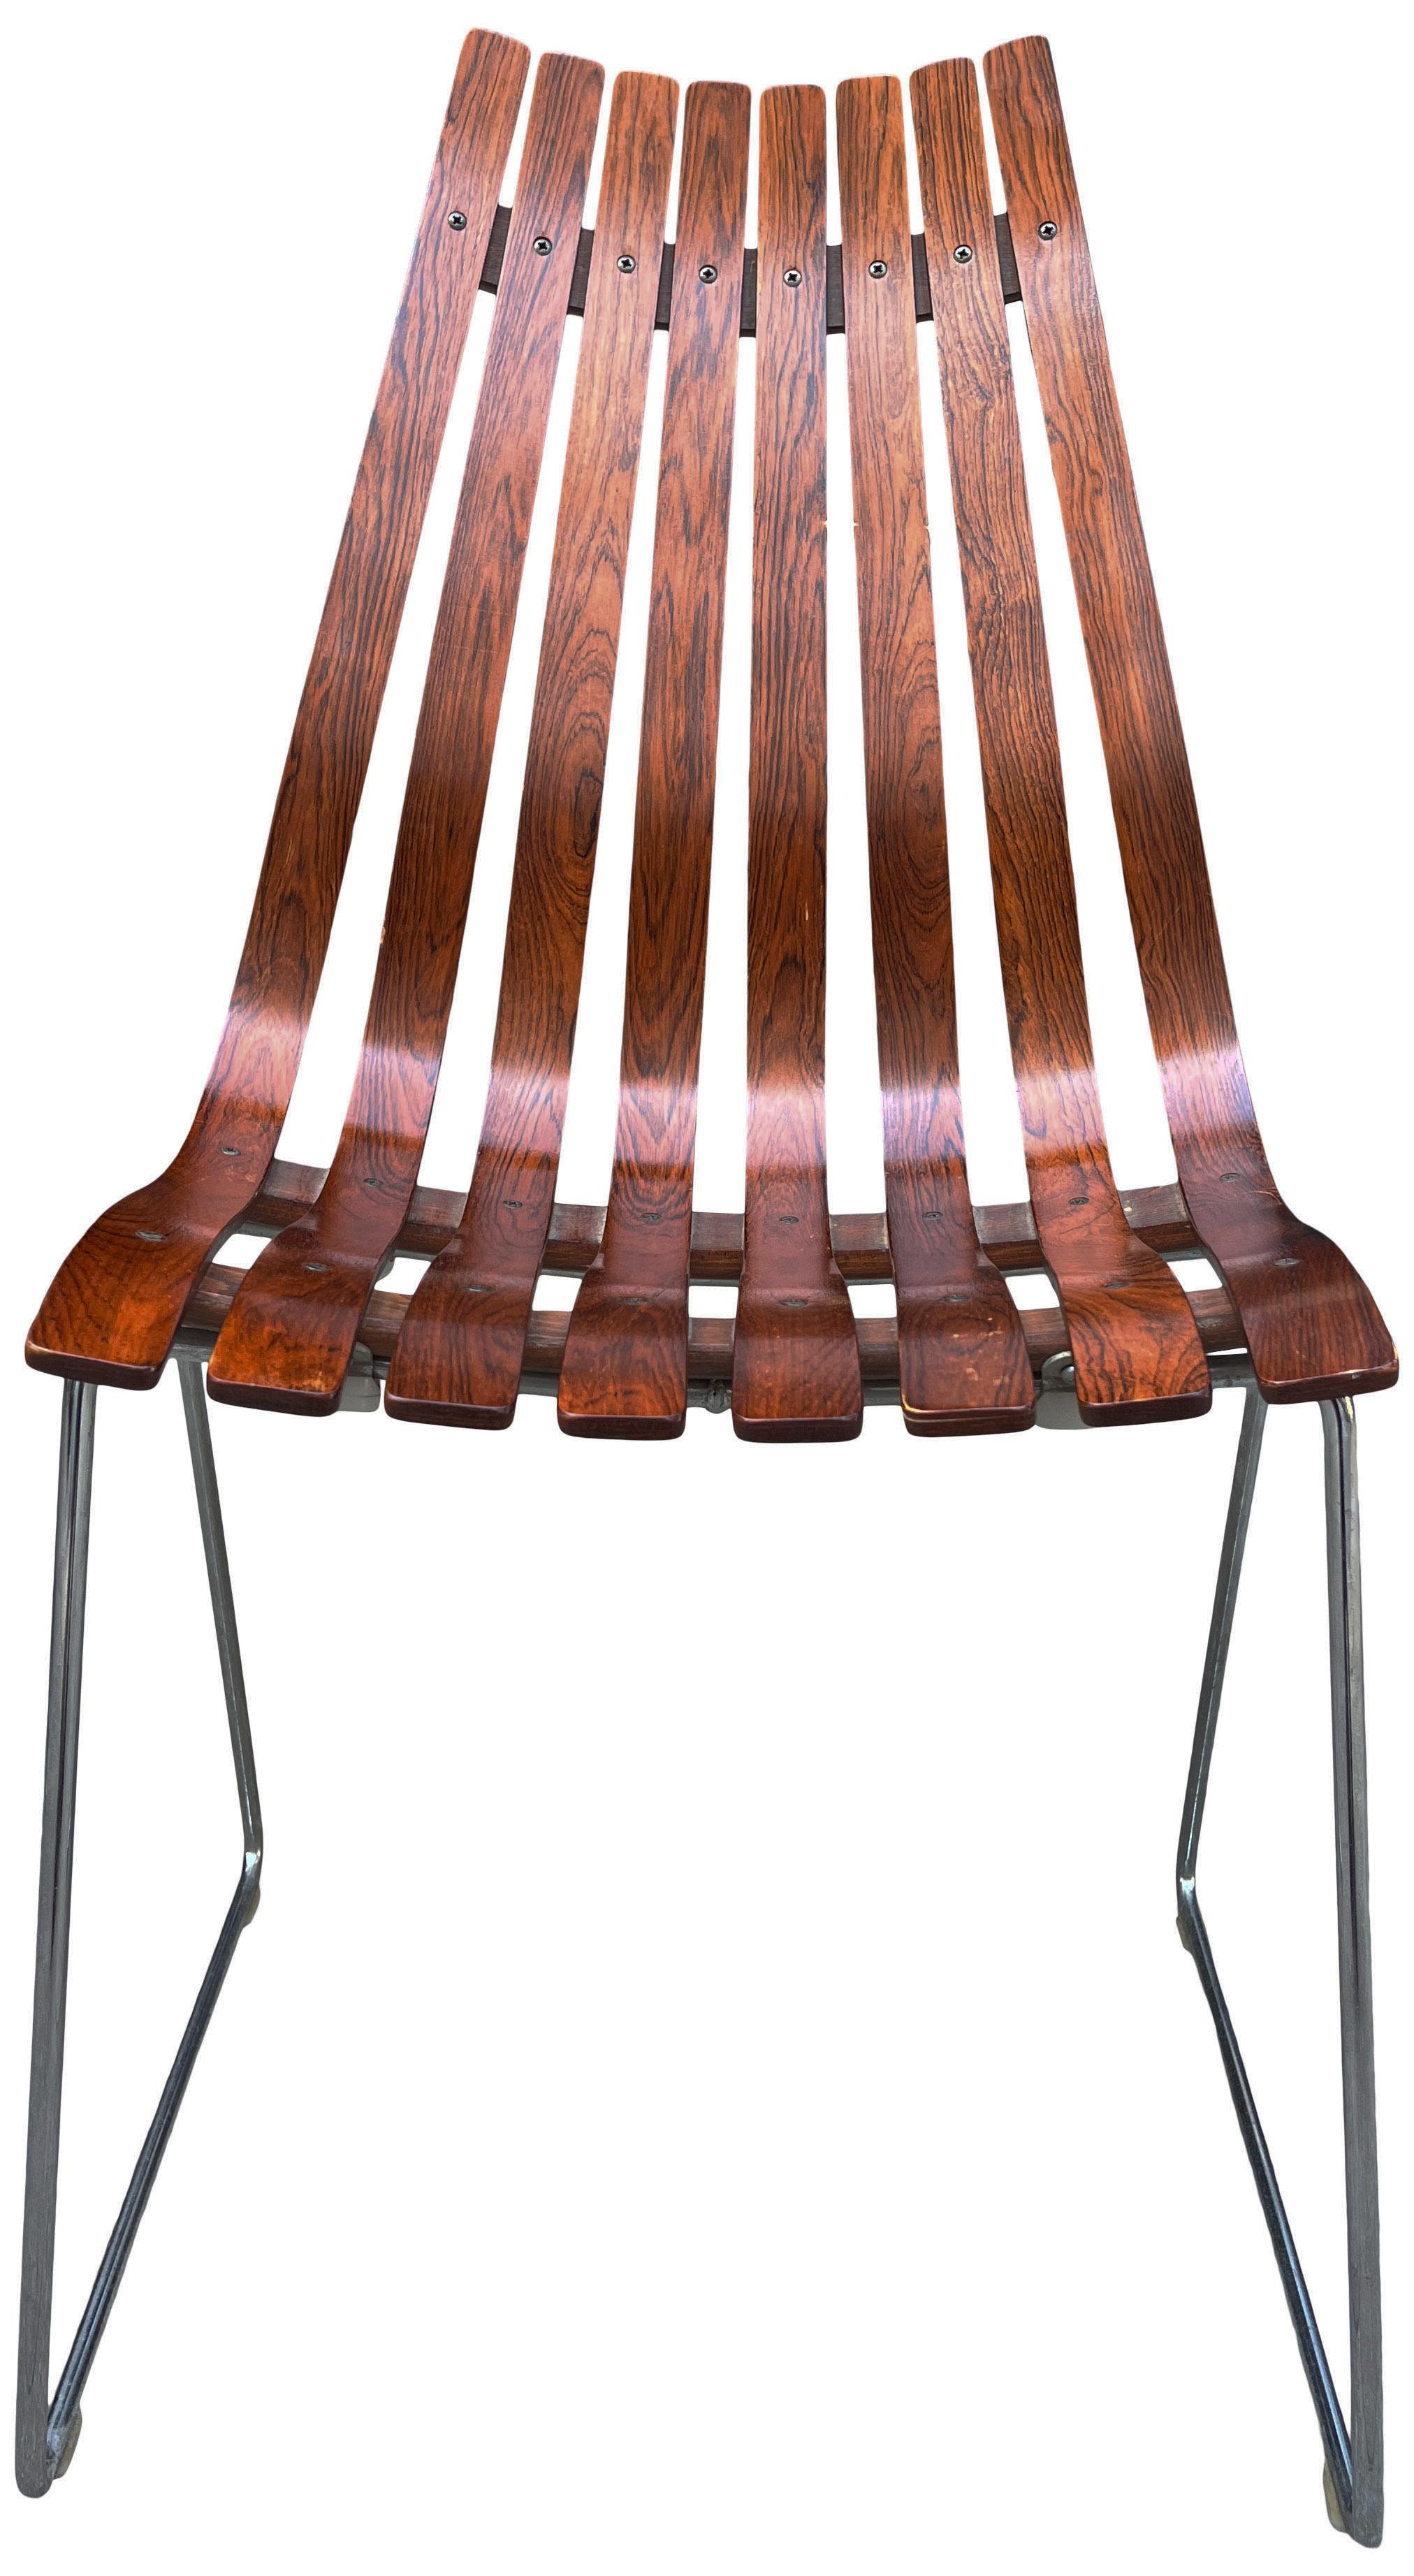 Beautiful example of Scandia high back dining chairs in excellent vintage condition. Rosewood slats on a chrome base. Chairs retain original label.
Norway, 1960s.

2 high back chairs are 37.5'' tall.